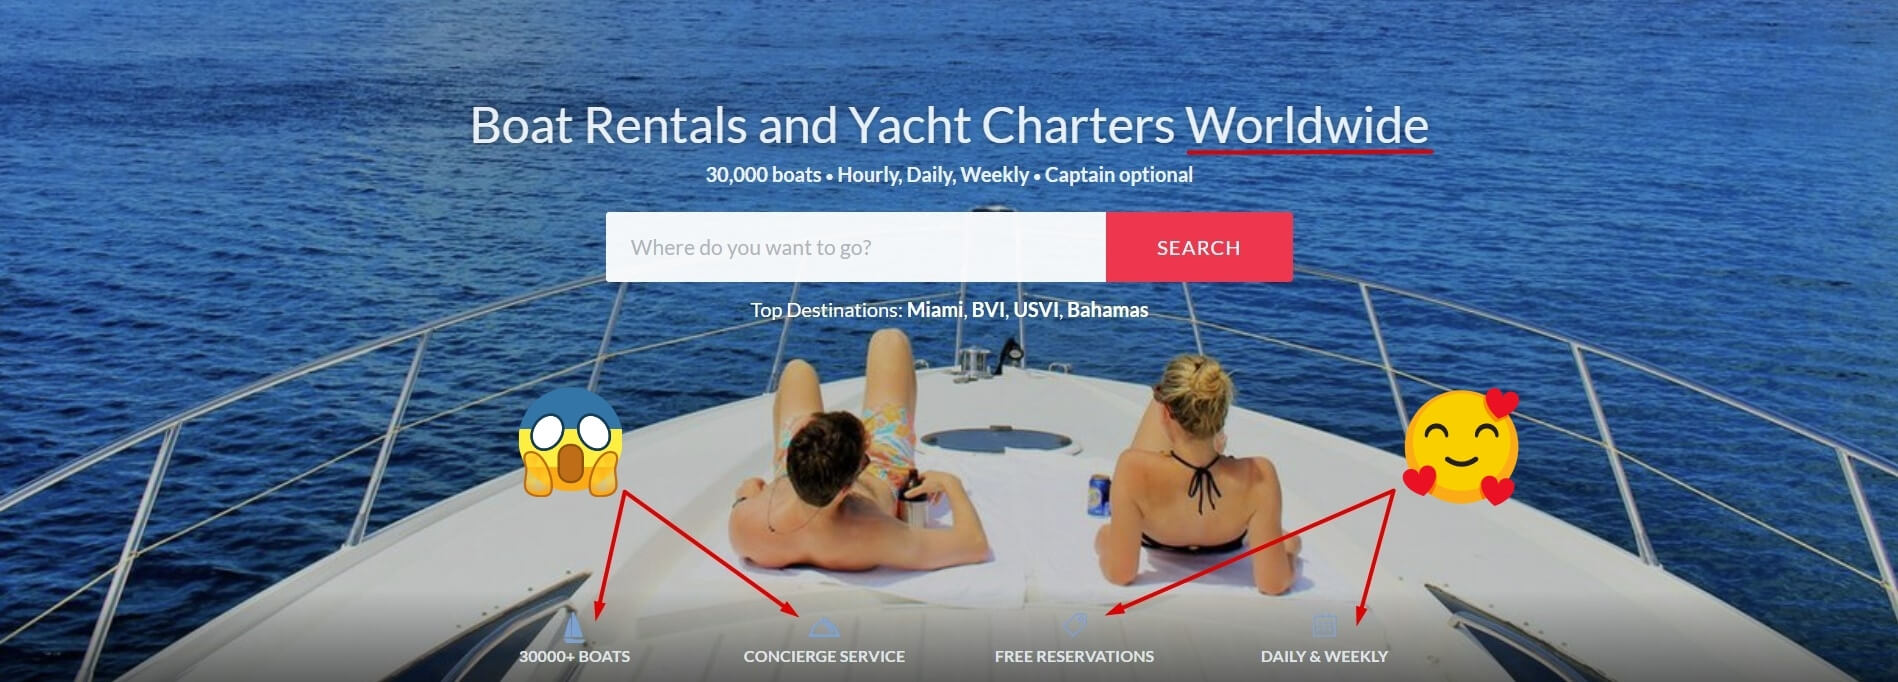 Banner image showing Sailo - an online platform to rent the experience of living on a boat